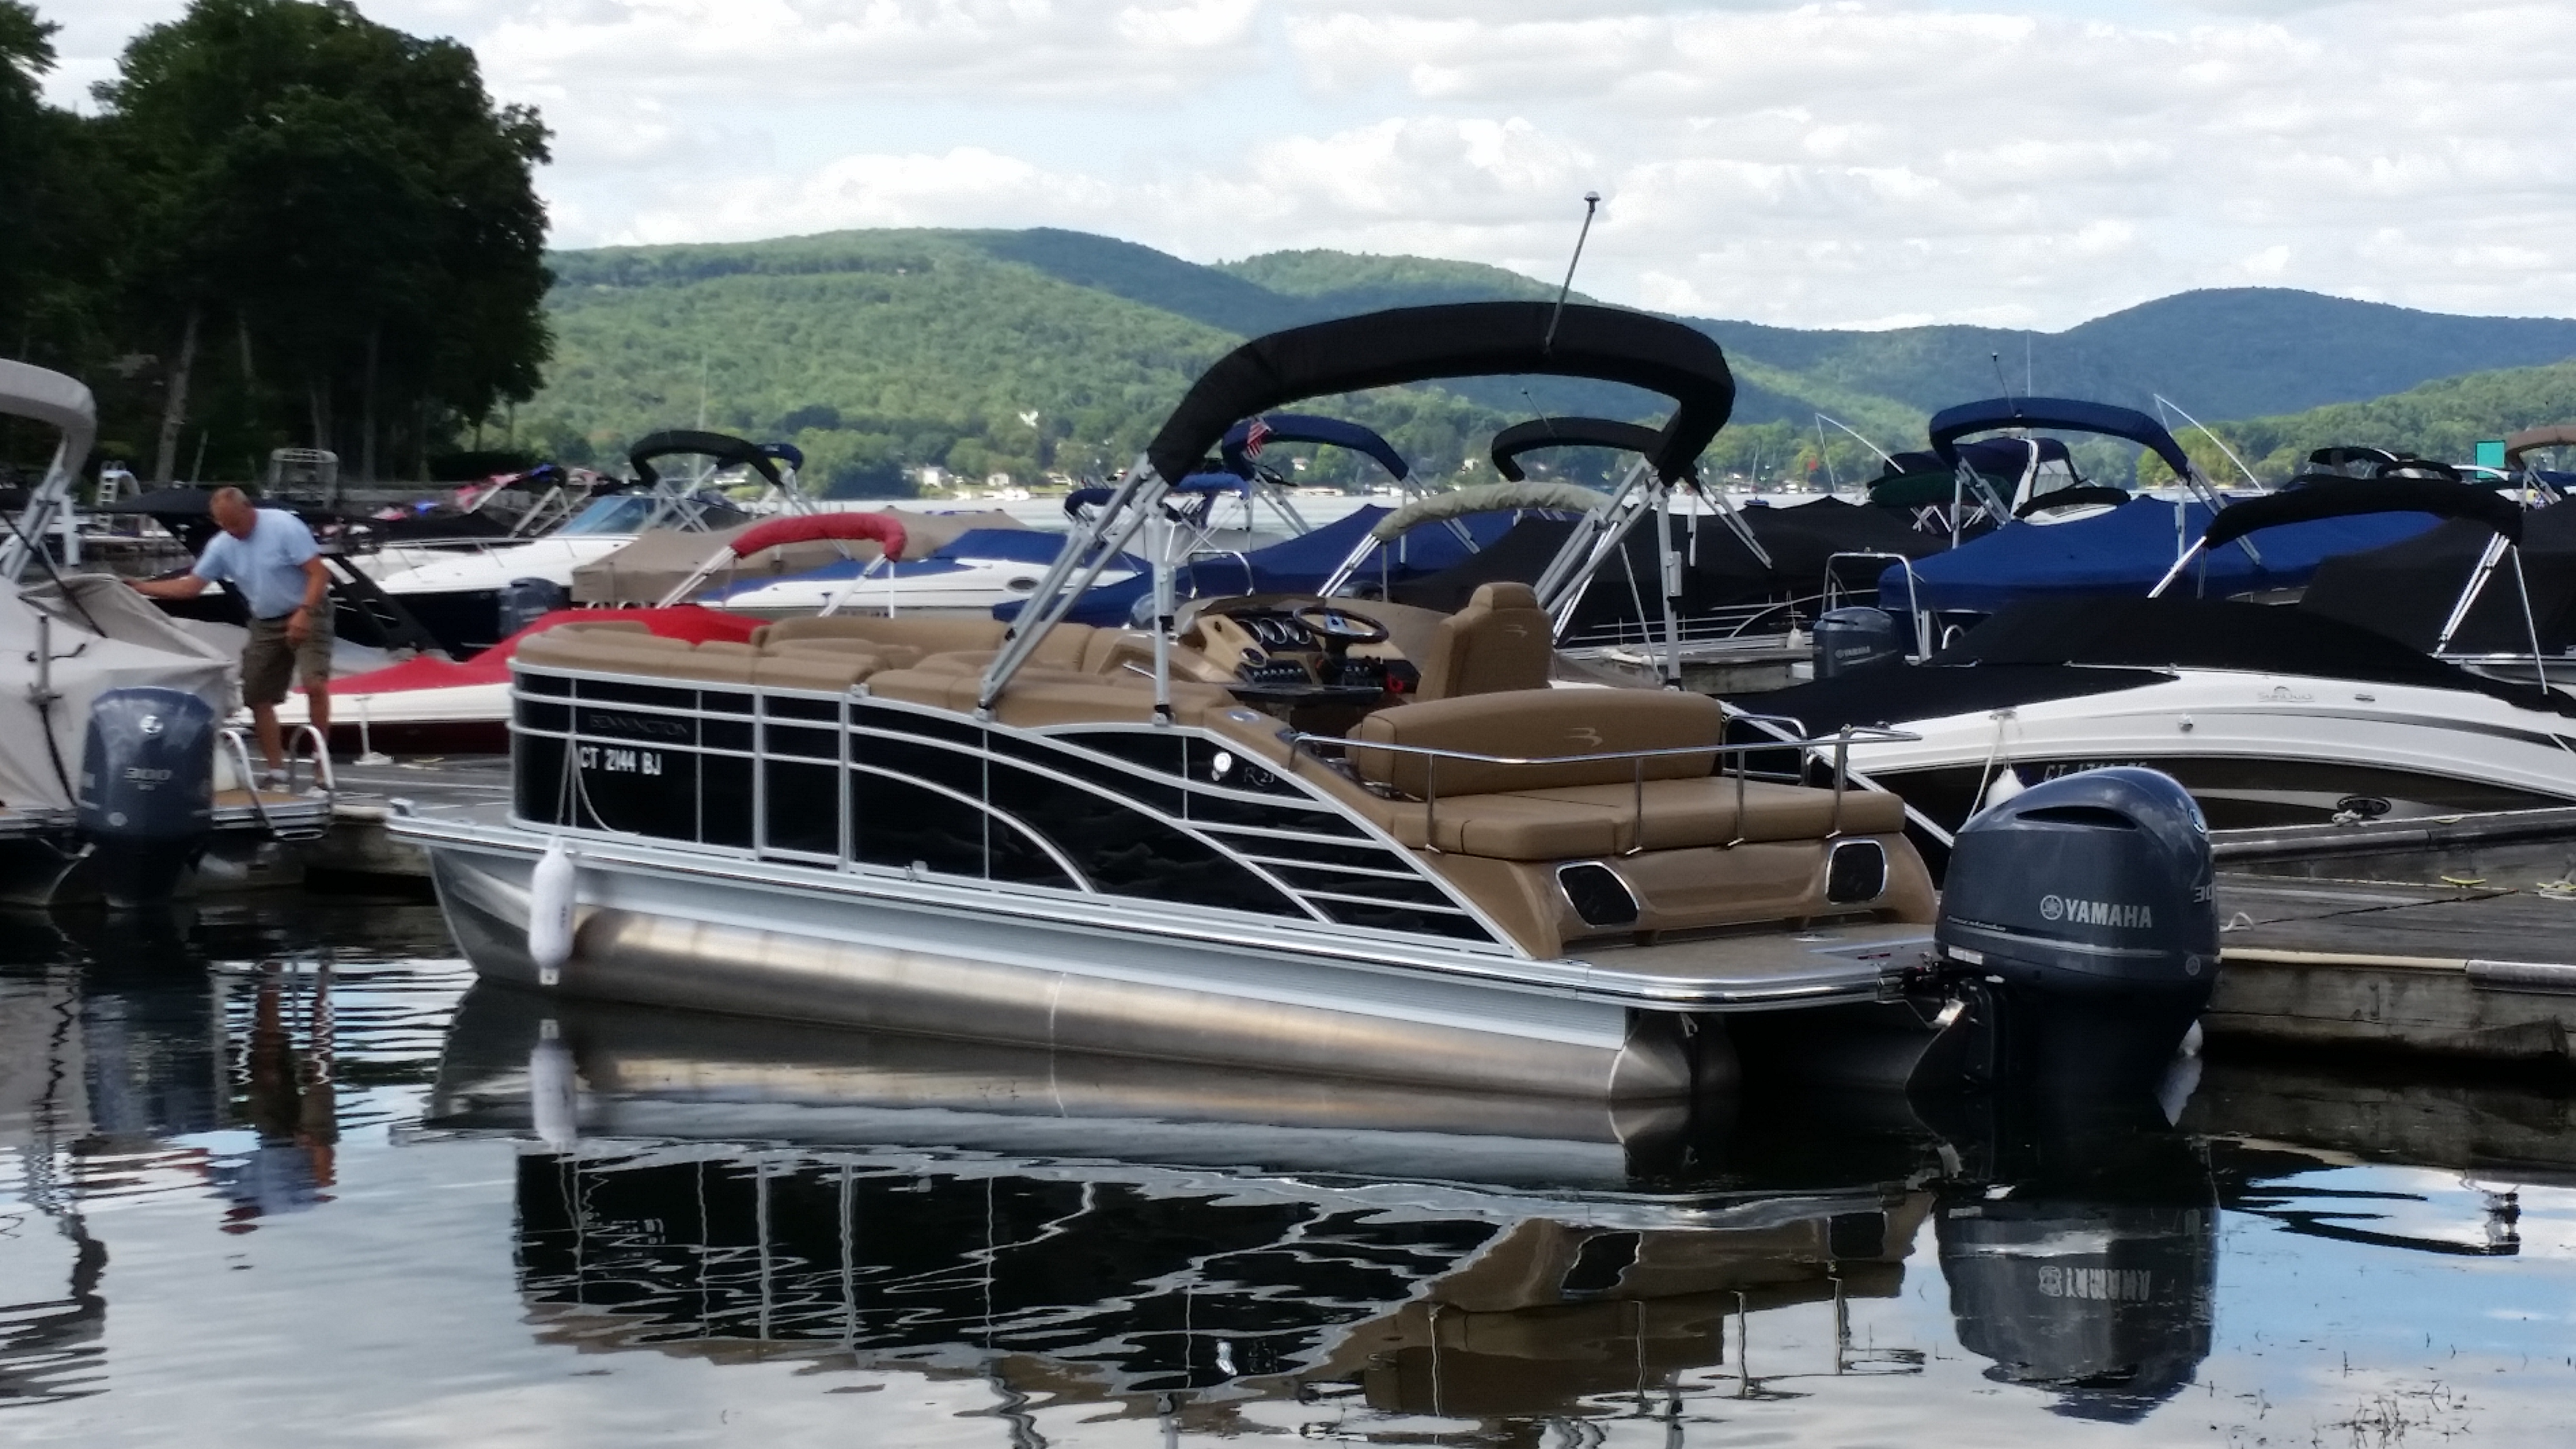 Our R23 swingback on Candlewood Lake in Connecticut